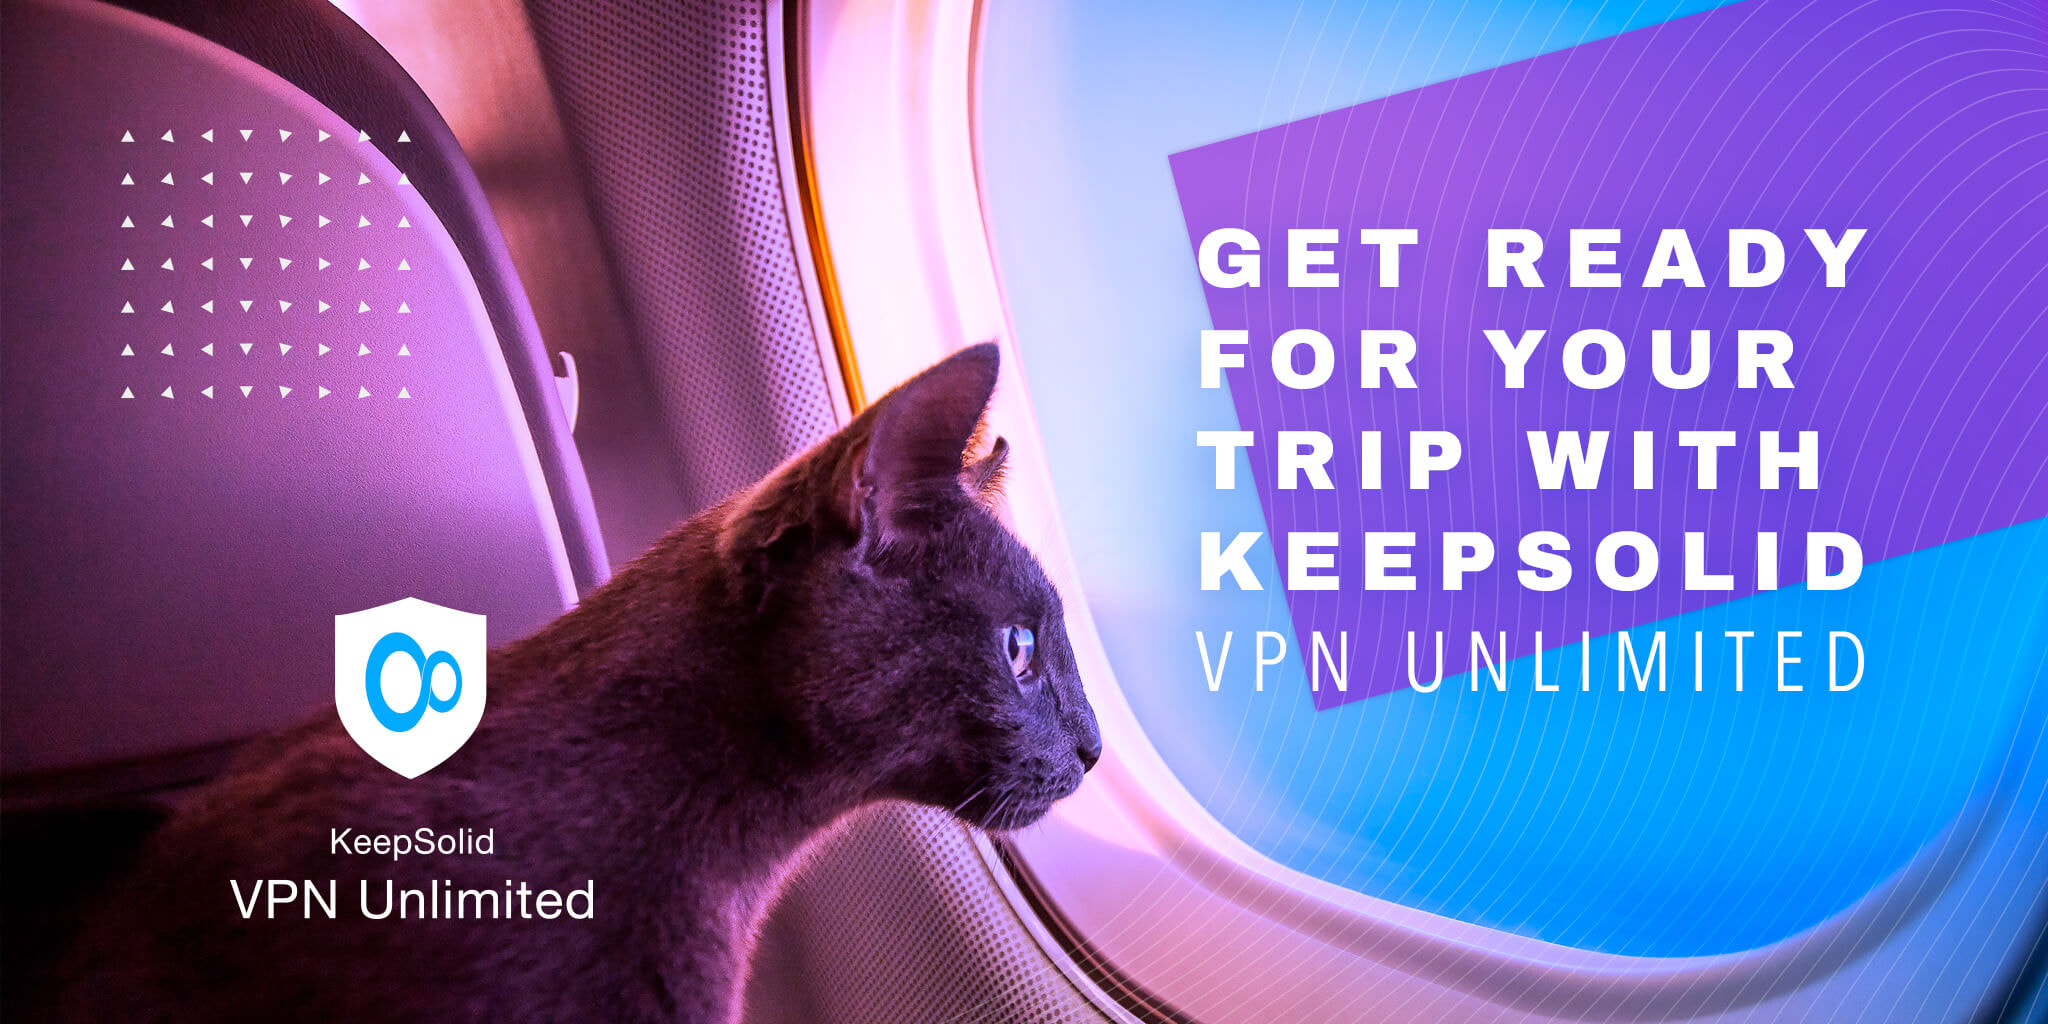 Cat, who booked cheap airline tickets with free VPN trial version, is sitting on the plane and looking in the window.